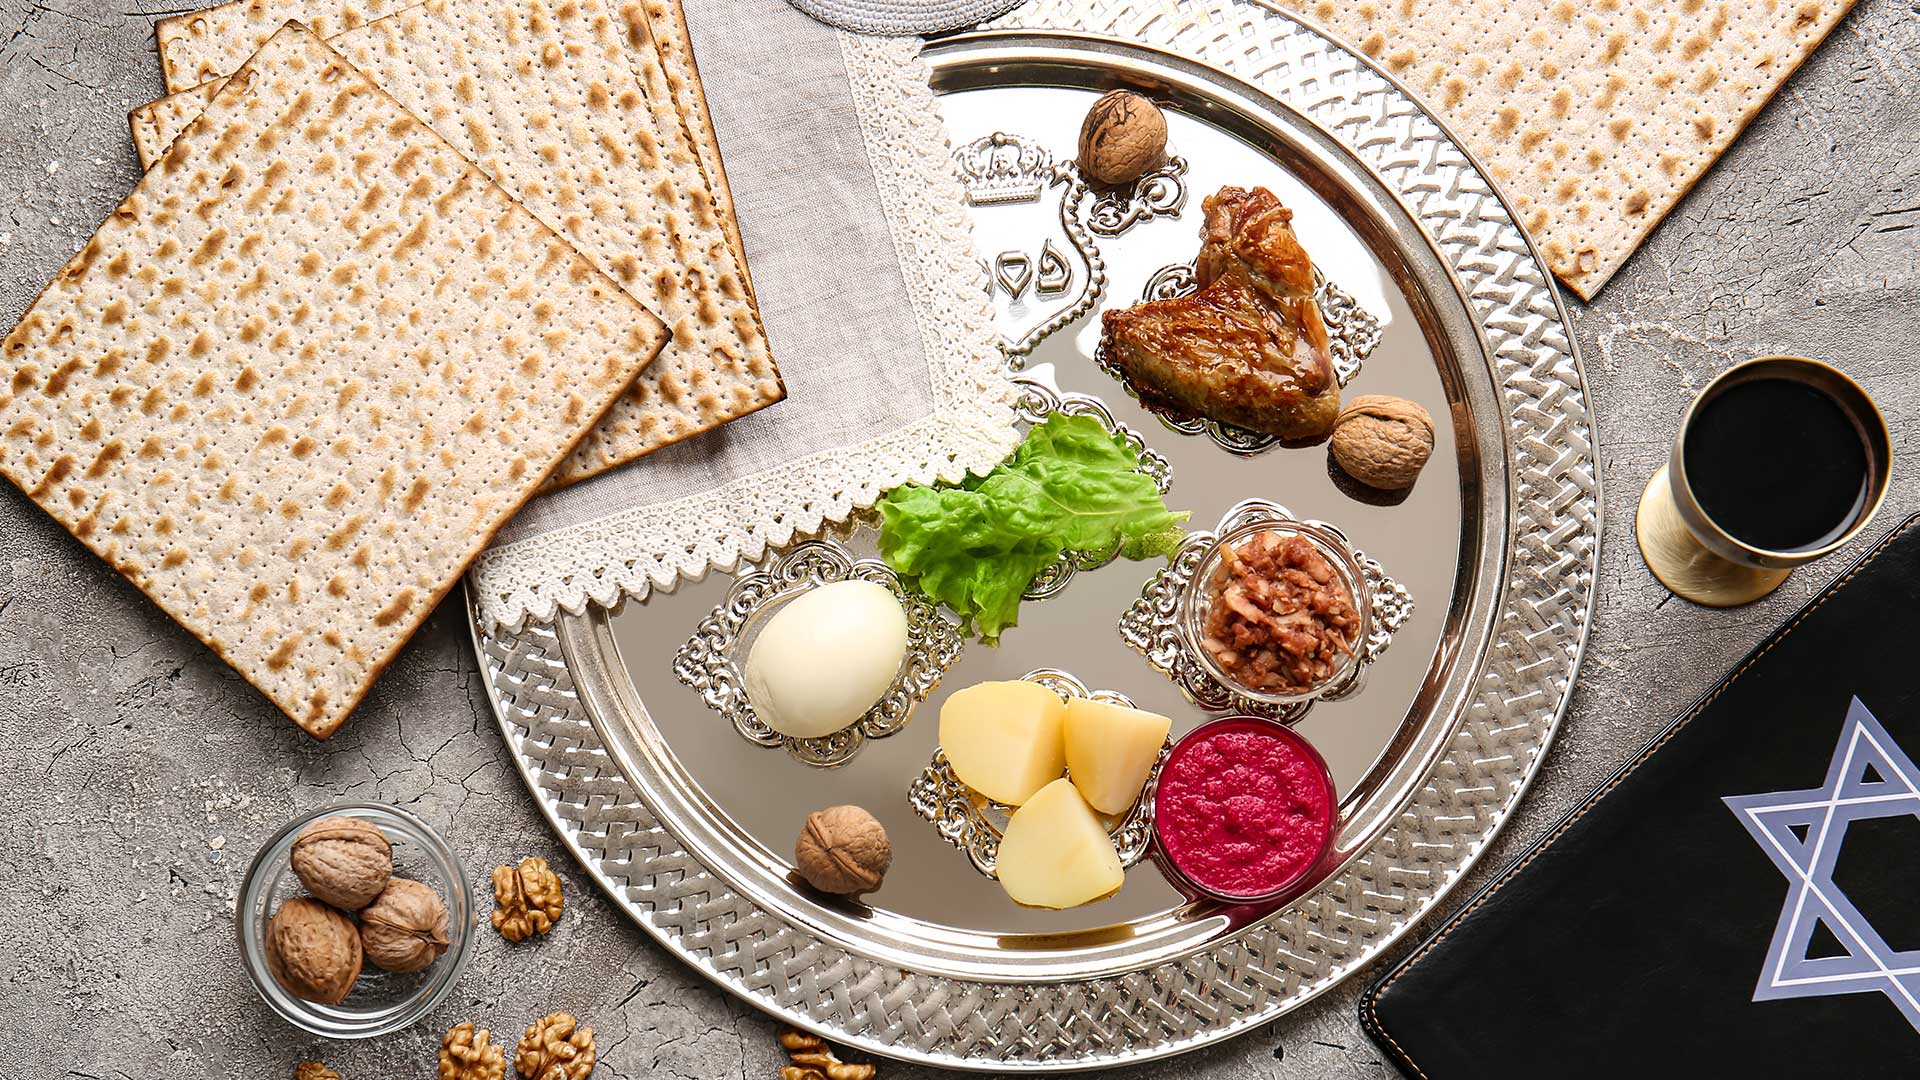 A Passover meal